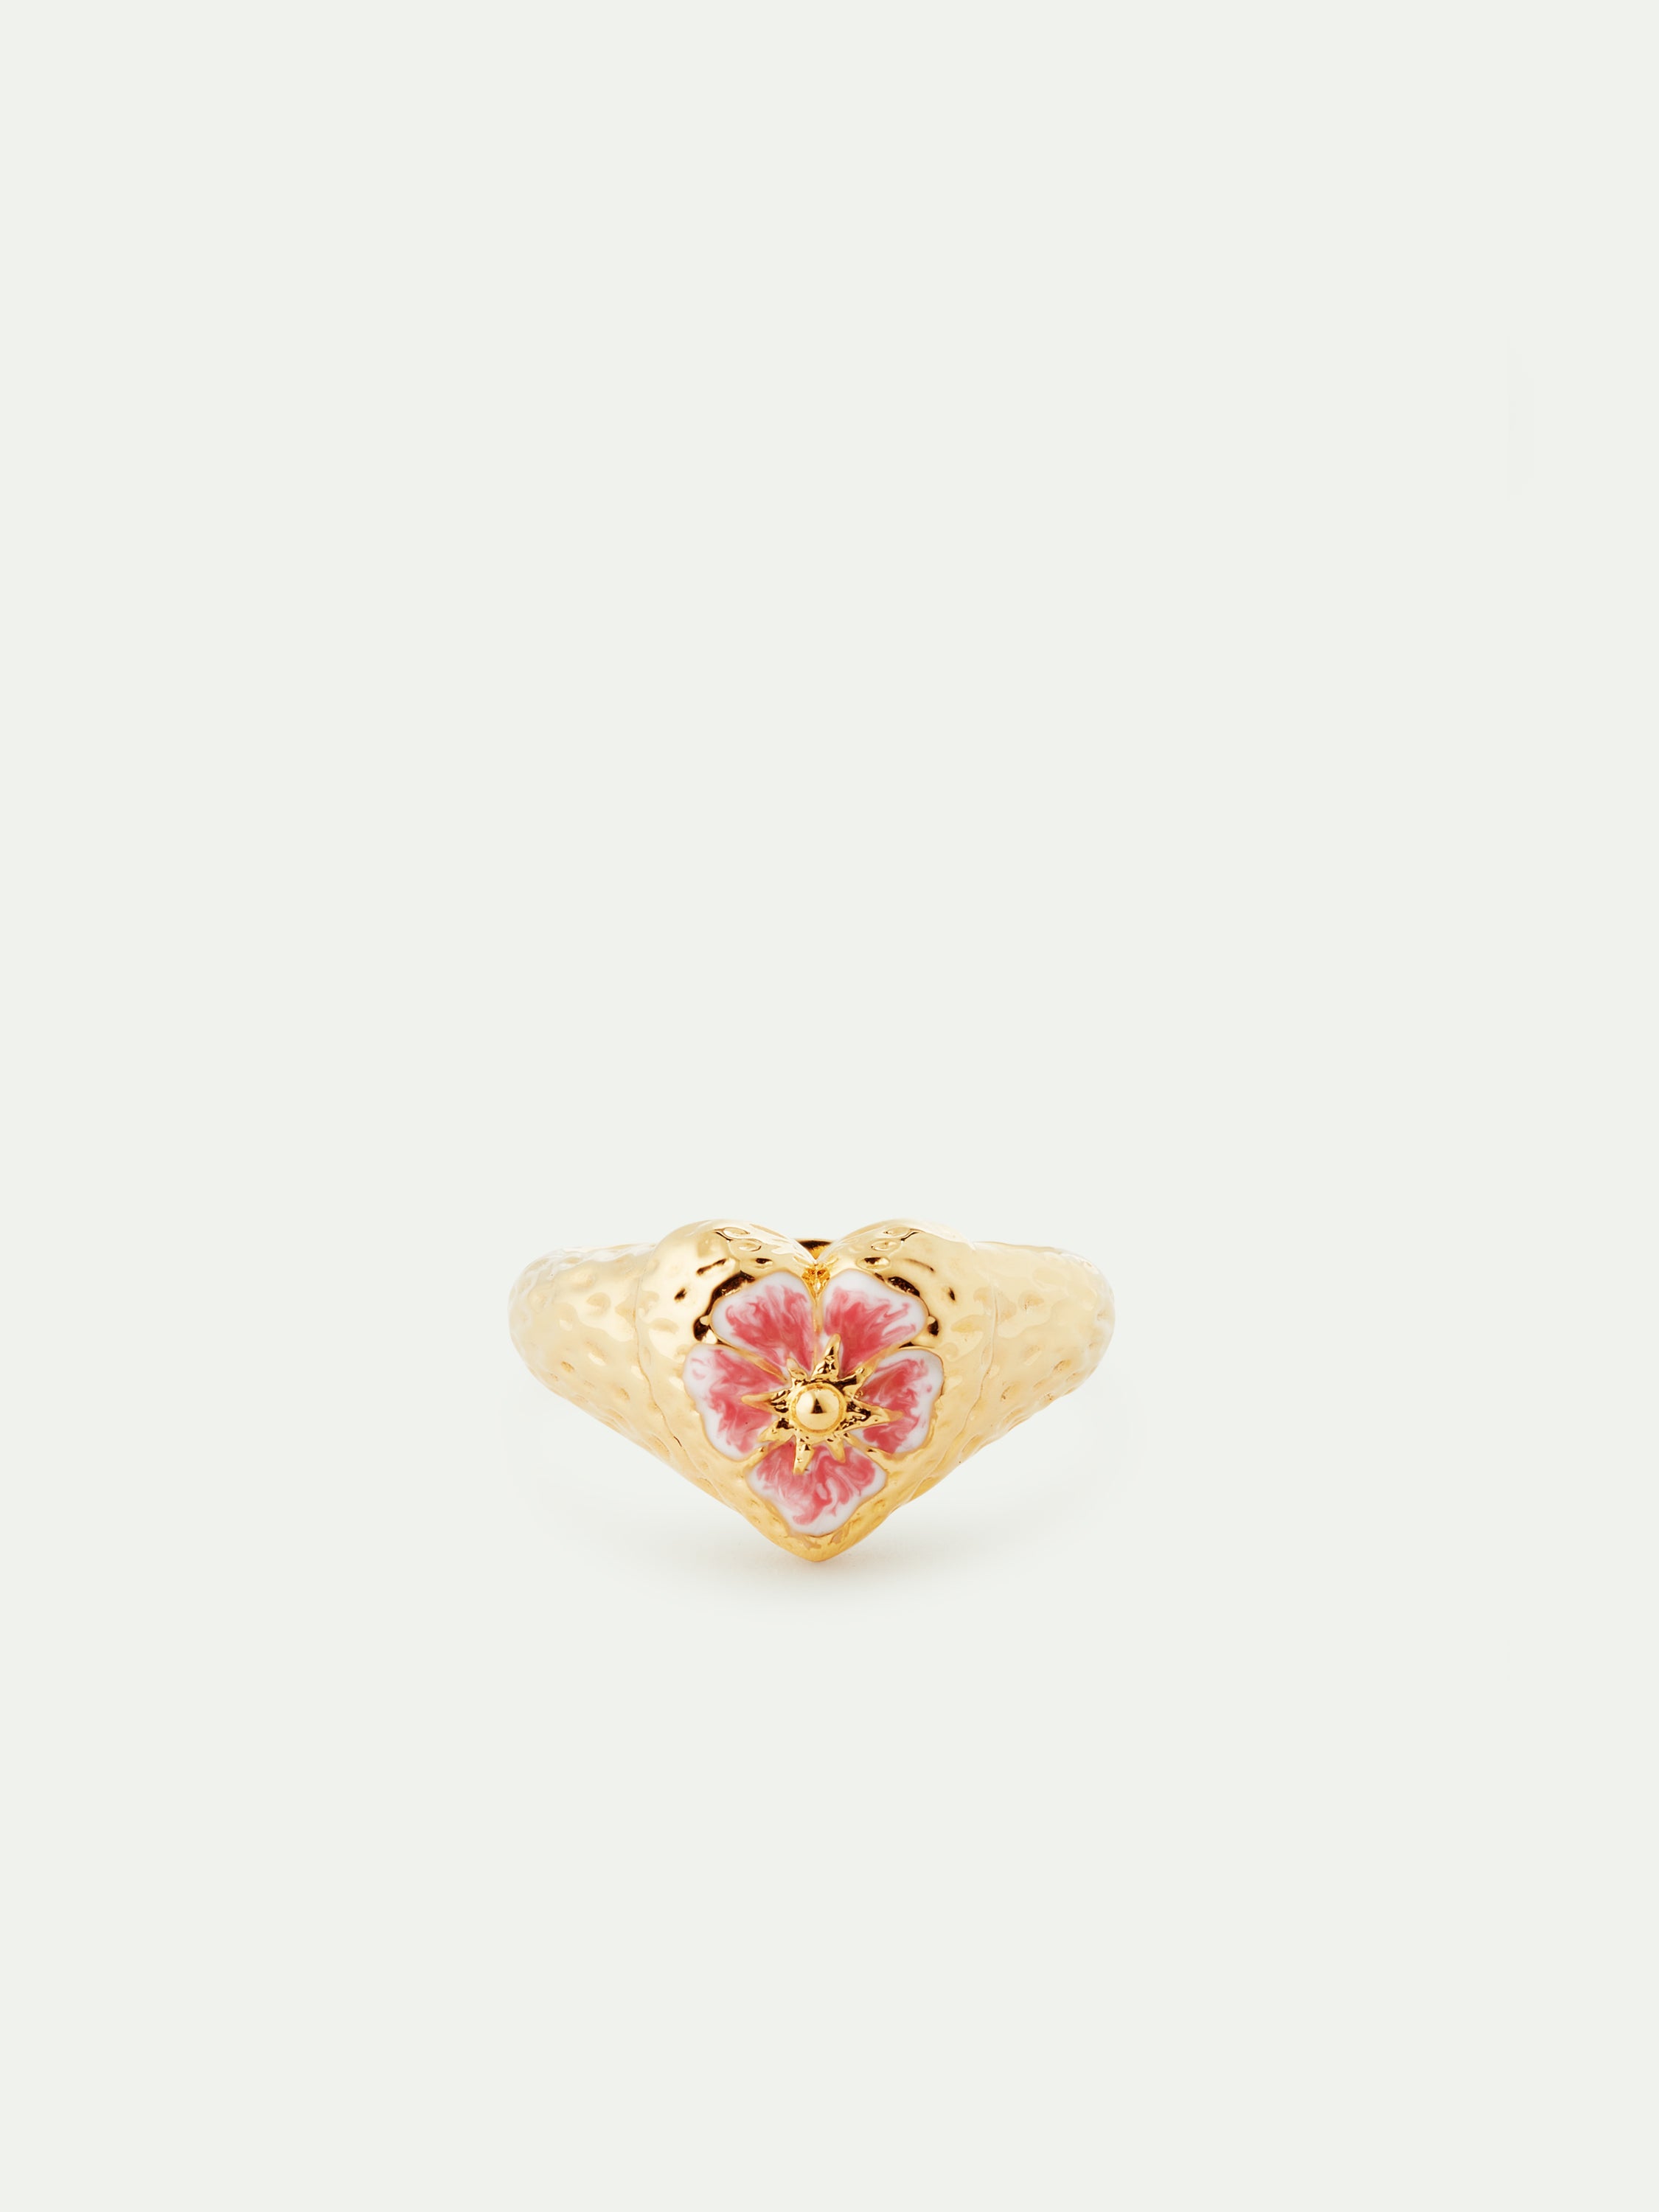 Heart and pansy flower cocktail ring